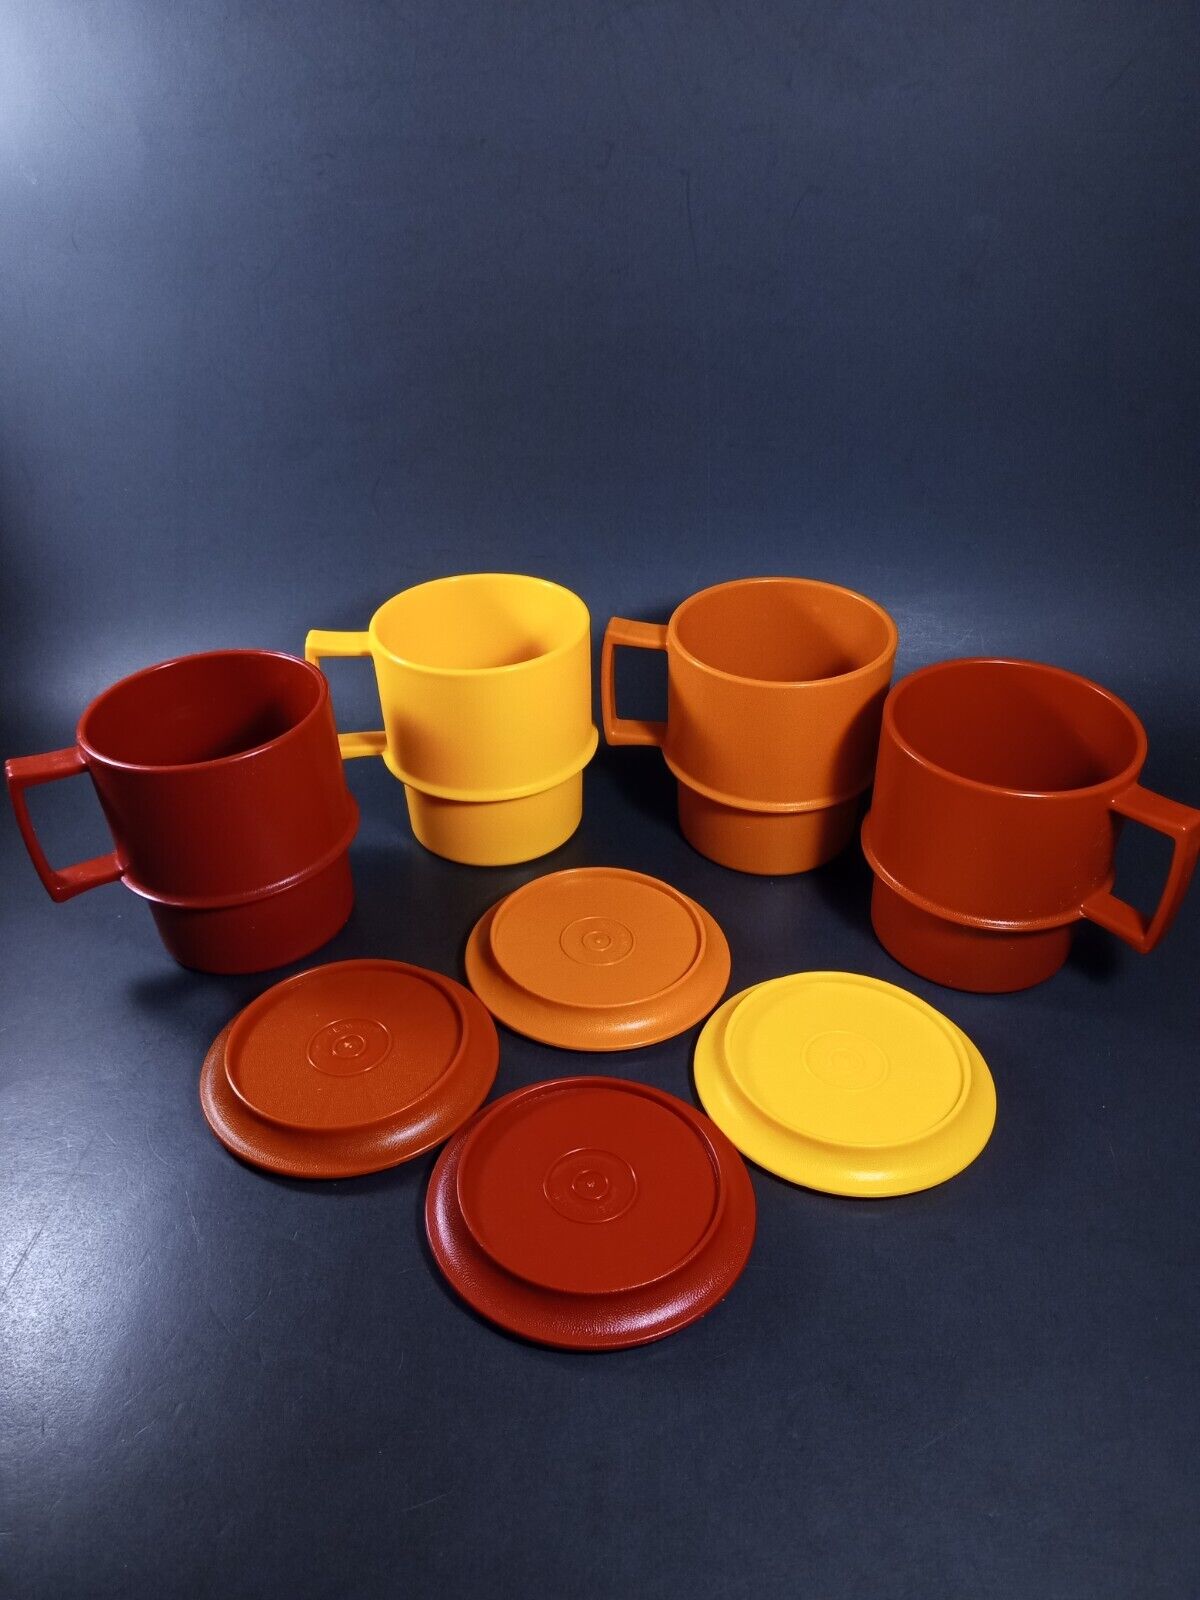 Lot of 4 Vintage Tupperware Cups with Coasters Harvest Fall Colors